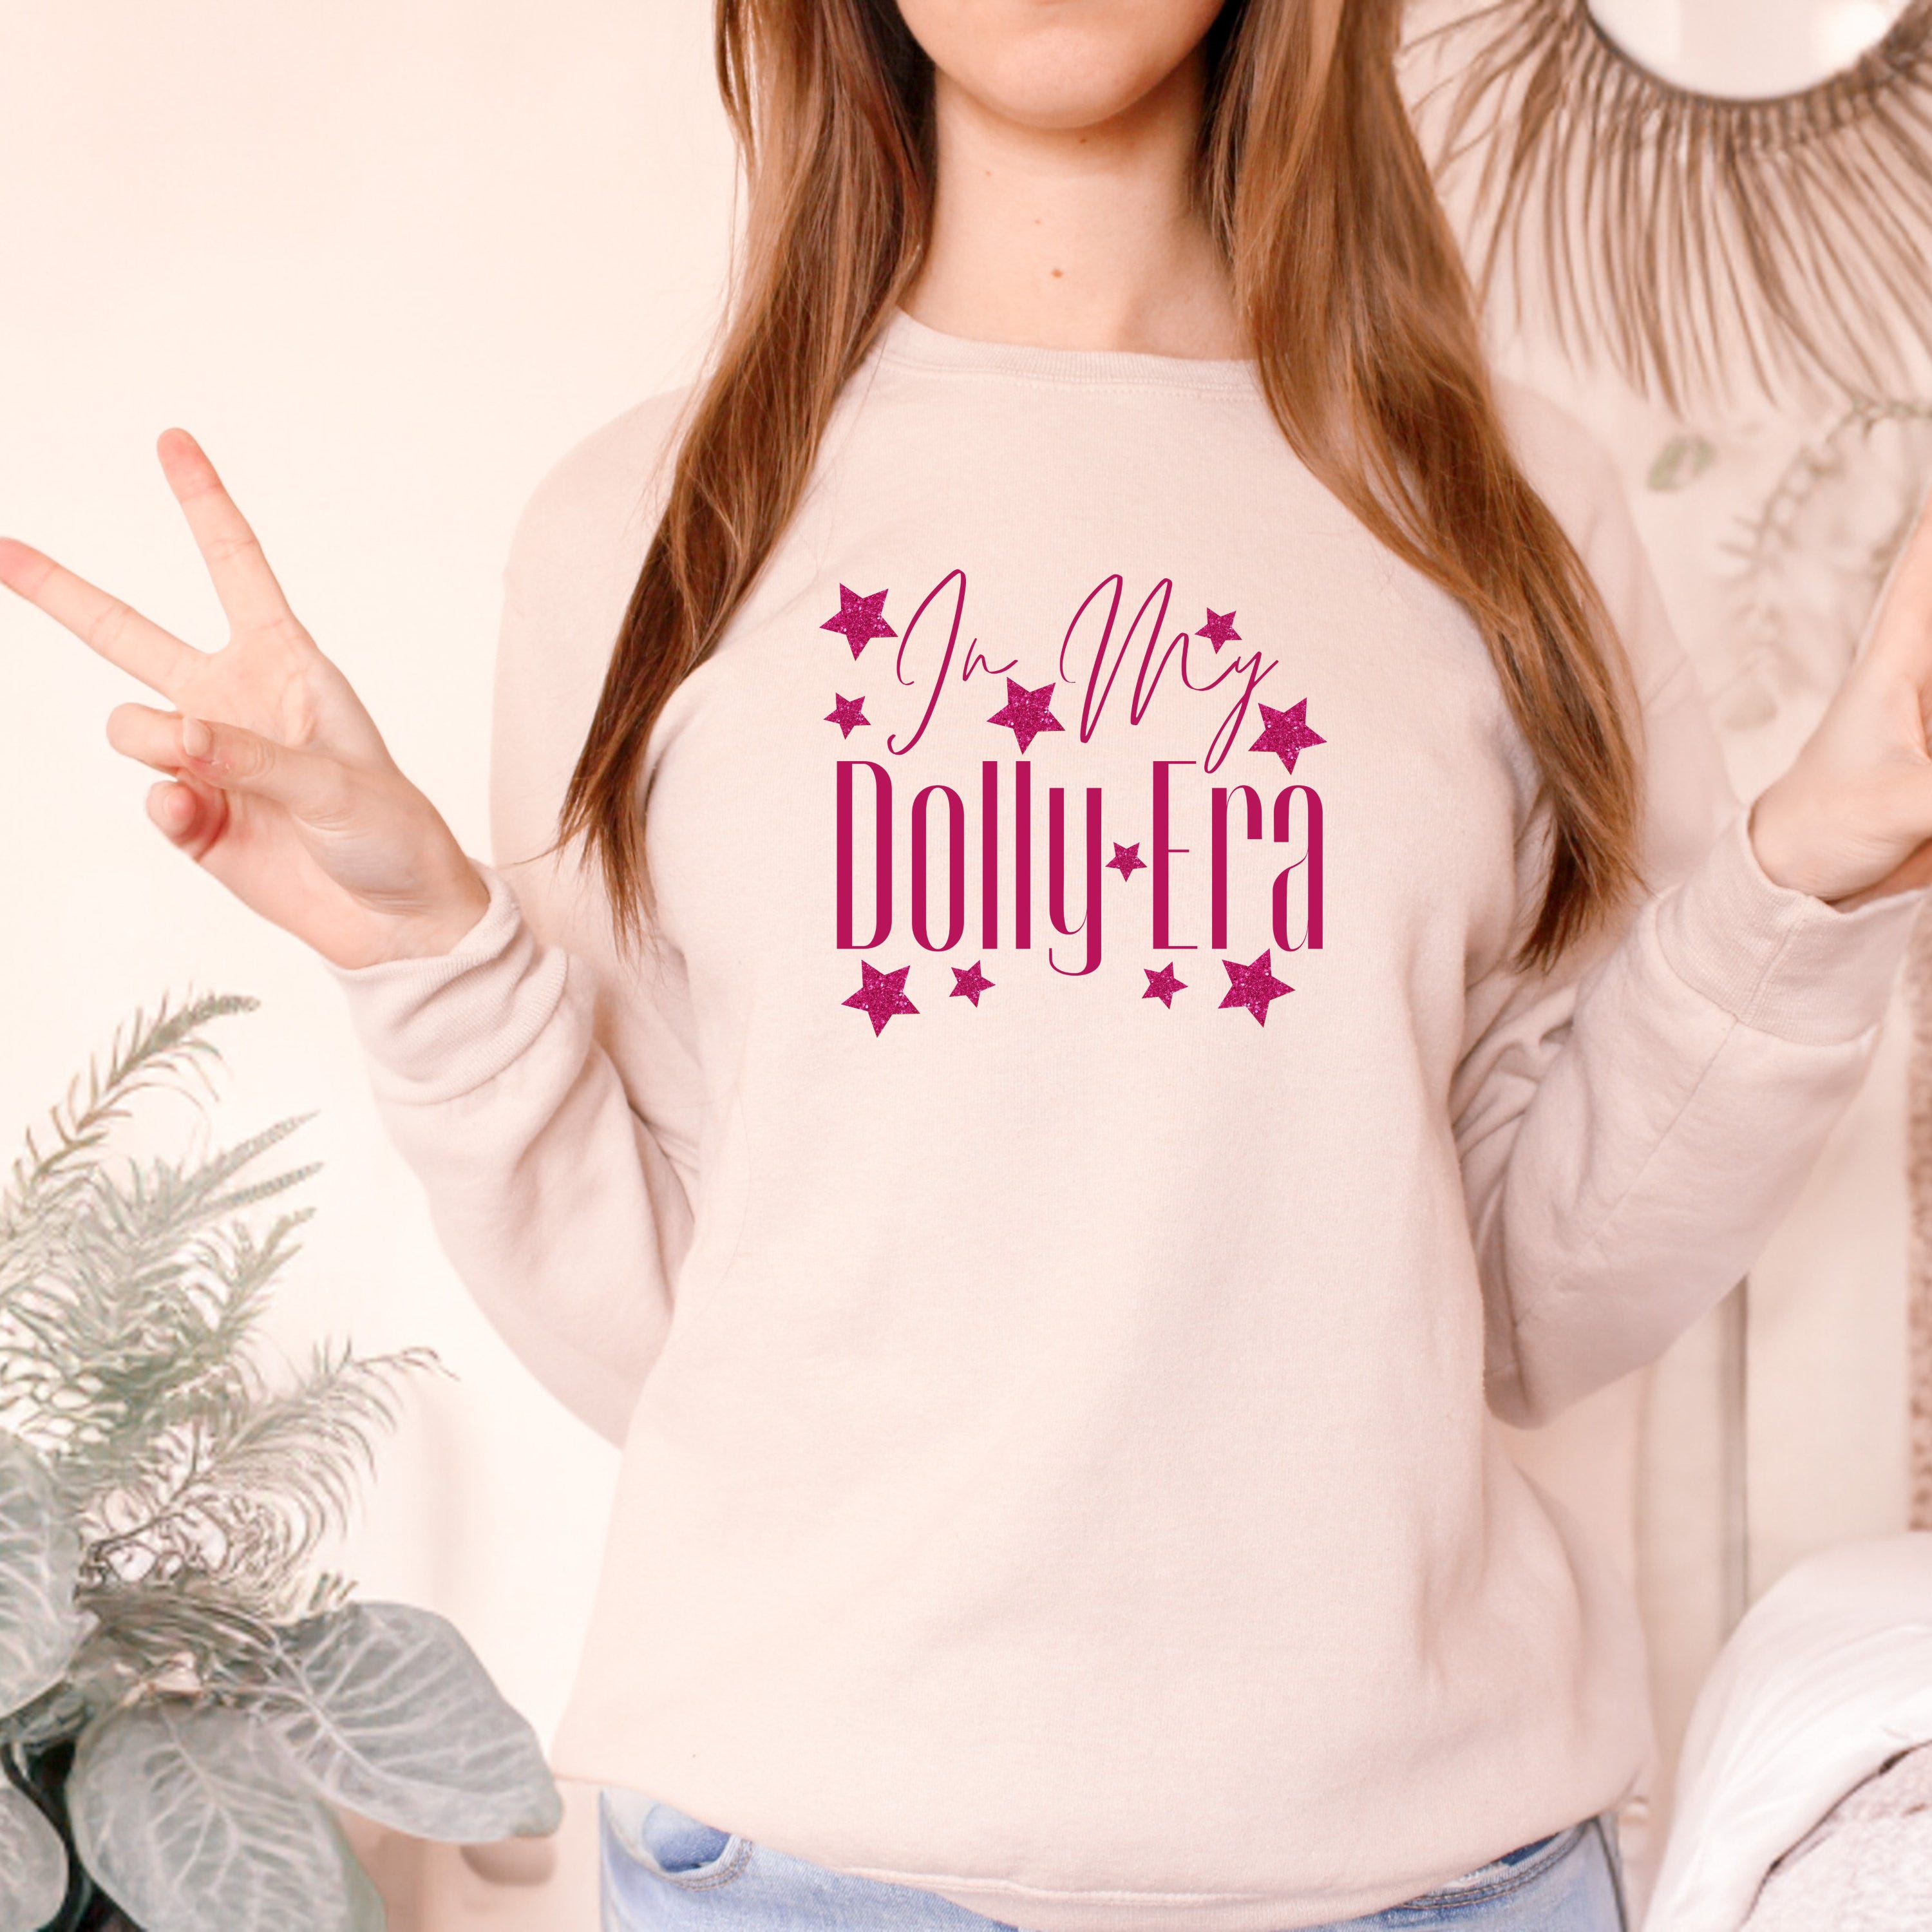 In My Dolly Era, Dolly Era Vibes, I love Dolly, Iconic Legend, Inspirational Celebrity Quotes, Instant printables, PNG file